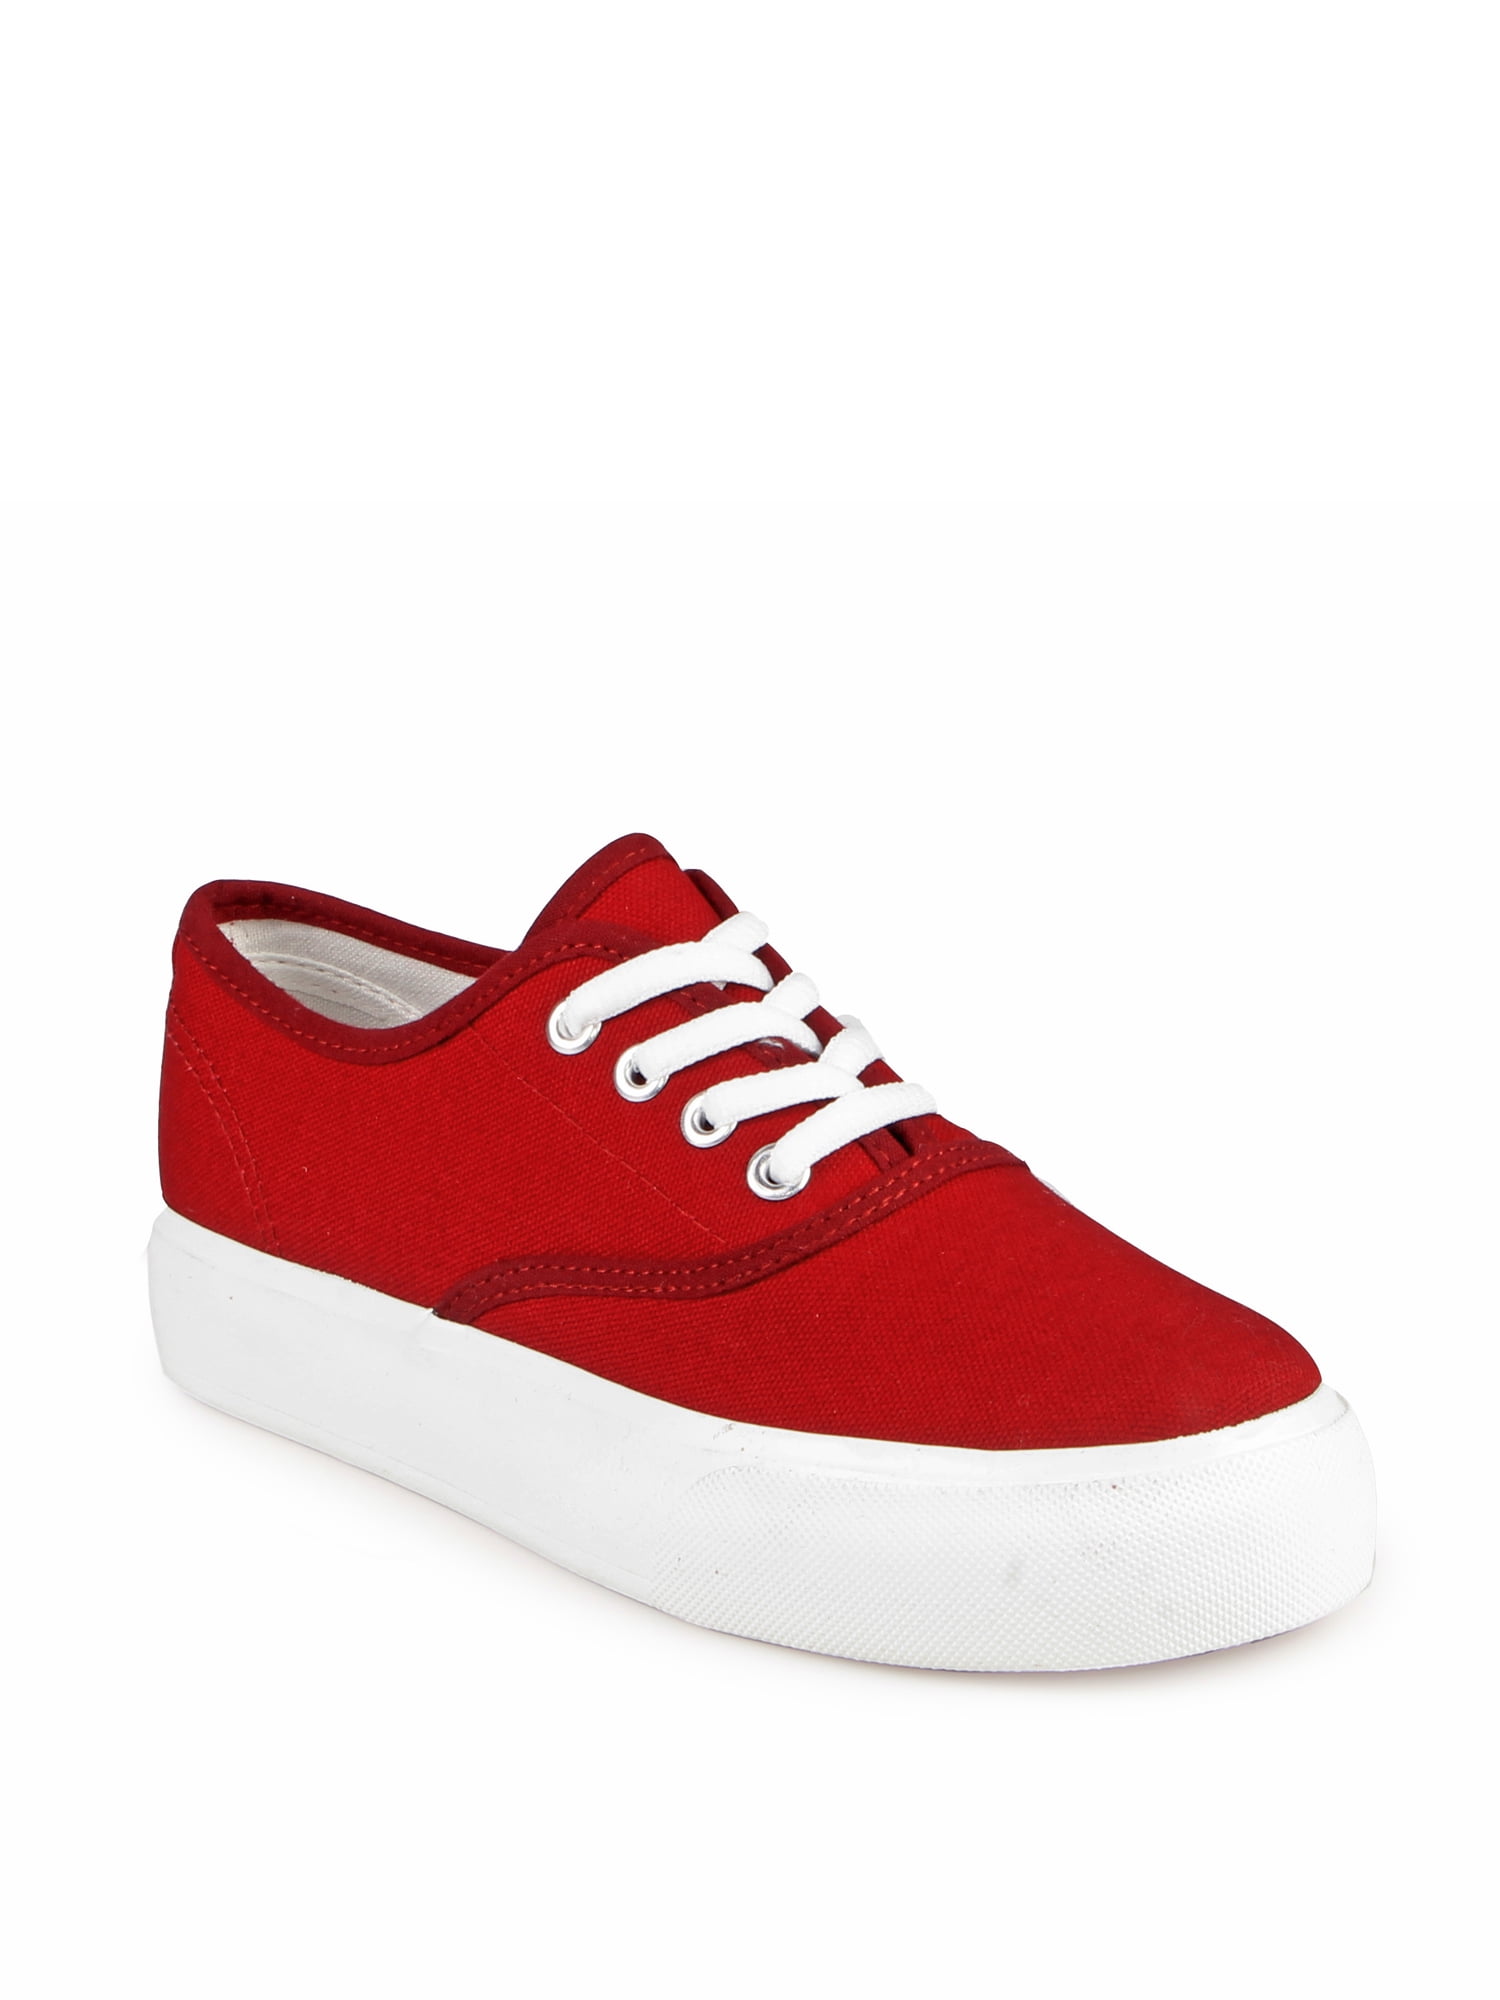 Red Snakeskin Pattern Slip - on Canvas Shoes - Free - Projects817 LLC